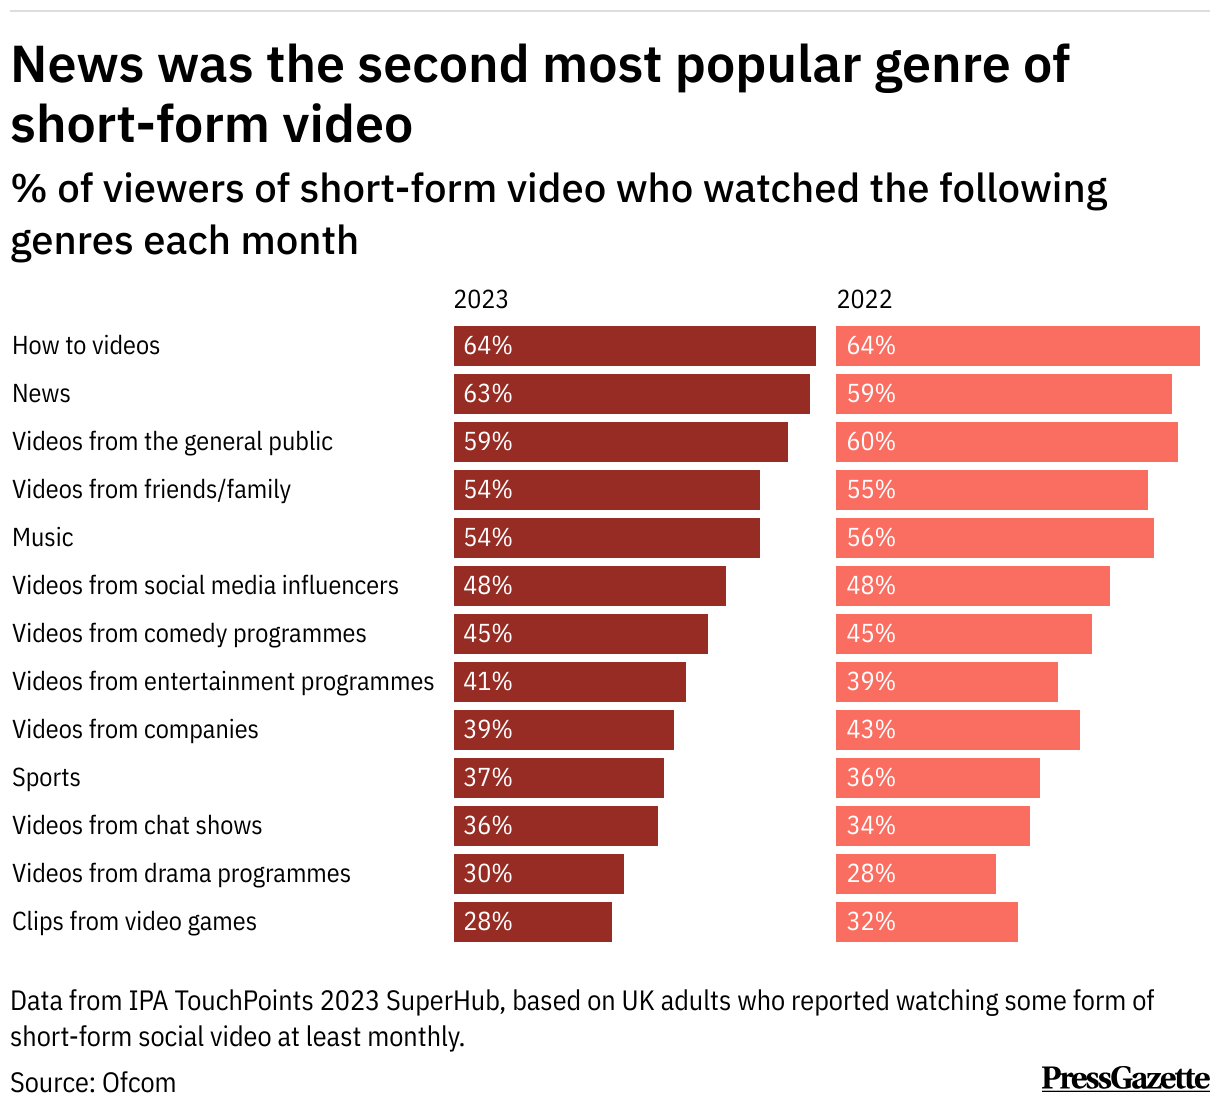 news-was-the-second-most-popular-genre-of-short-form-video(1)